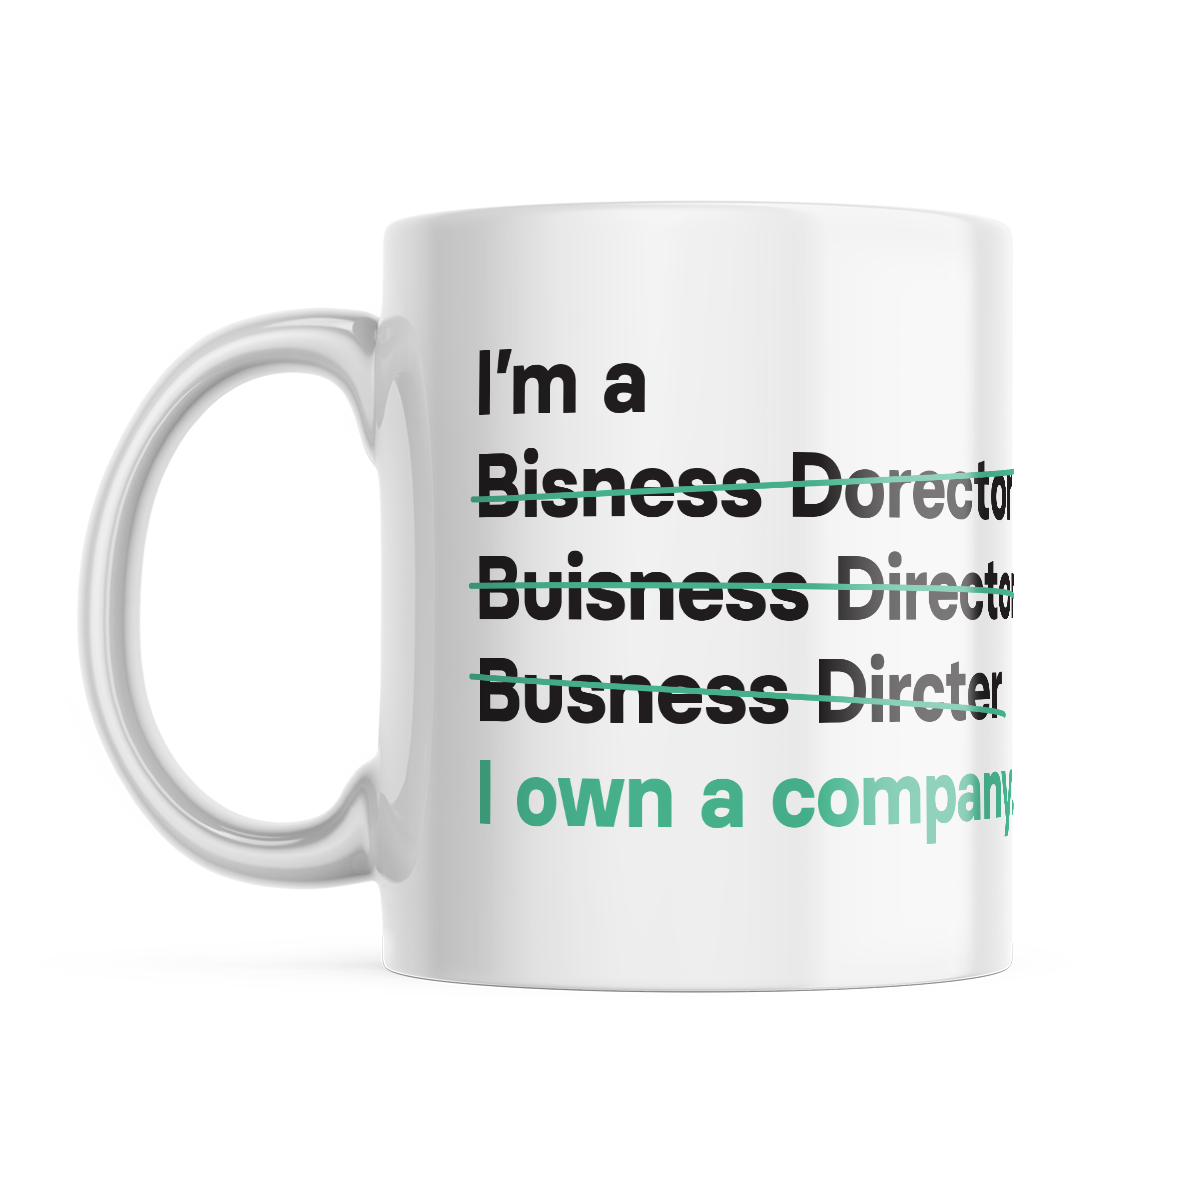 I'm a Business Director